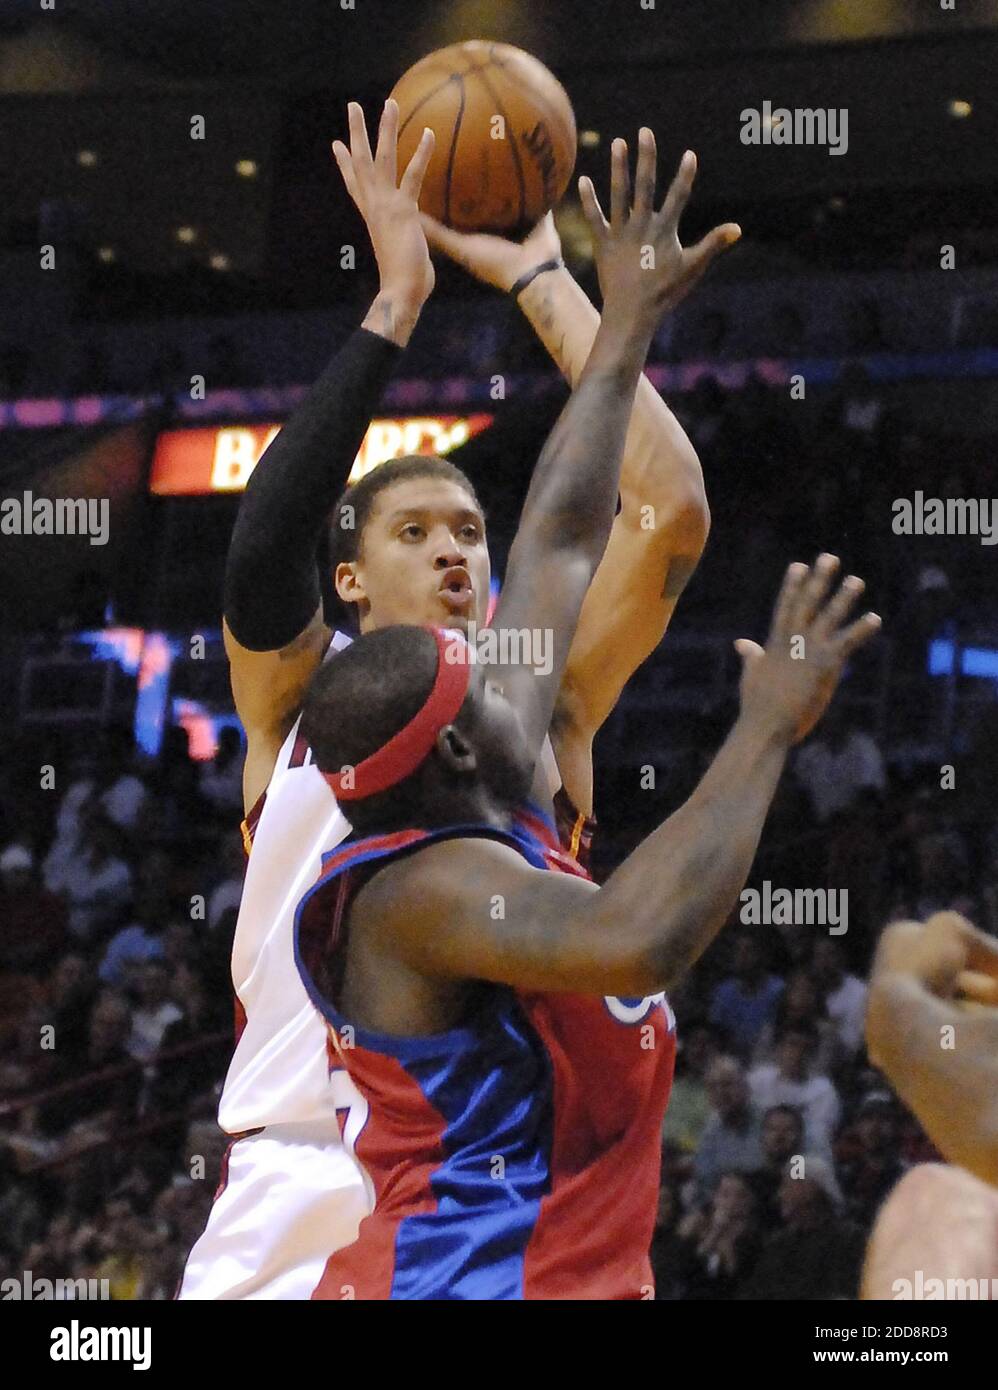 NO FILM, NO VIDEO, NO TV, NO DOCUMENTARY - Miami Heat's Michael Beasley puts up a shot as Los Angeles Clippers Zach Randolph (50) defends during the second quarter at the AmericanAirlines Arena in Miami, FL, USA on February 2, 2009. Photo by Gaston De Cardenas/Miami Herald/MCT/Cameleon/ABACAPRESS.COM Stock Photo